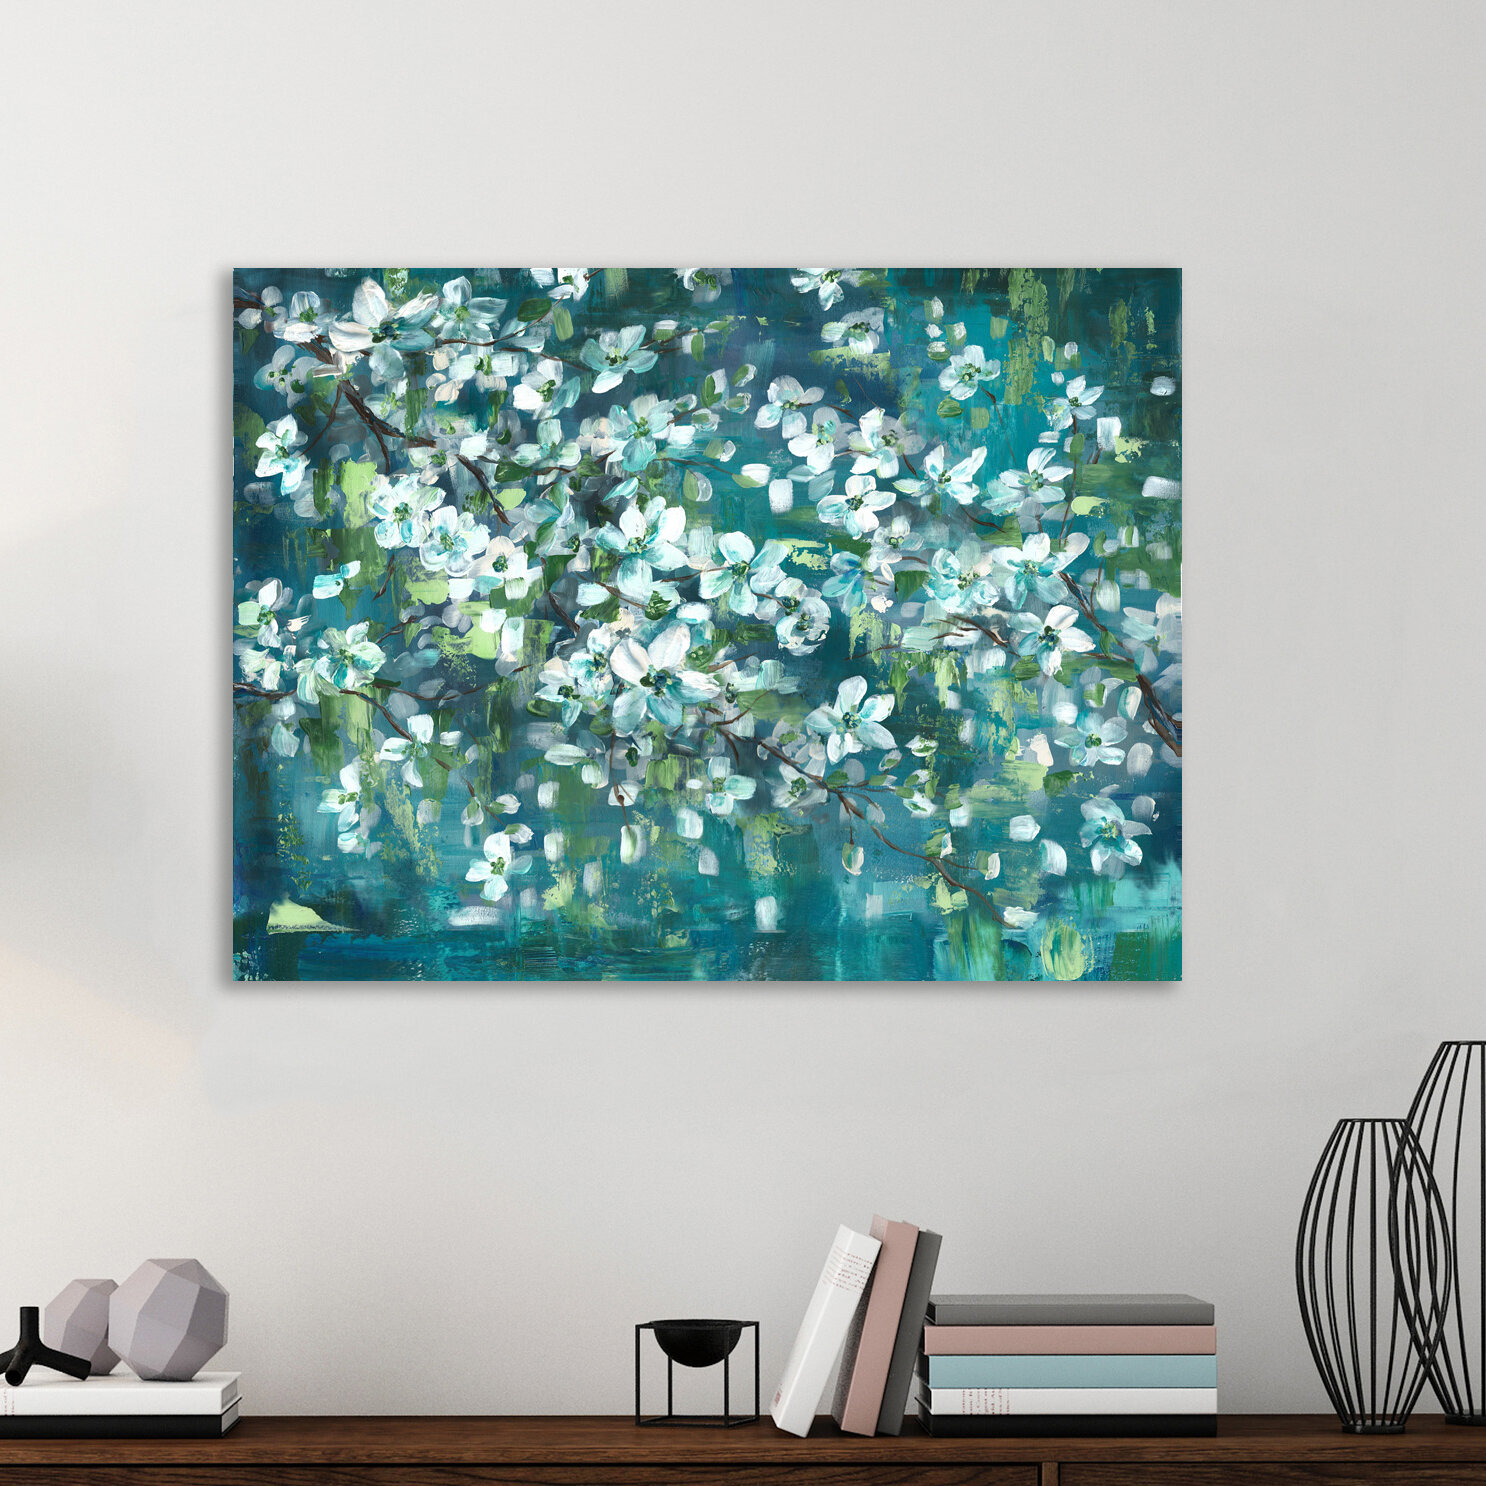 Charlton Home® Teal Blossoms On Canvas by Tre Sorelle Studios Print ...